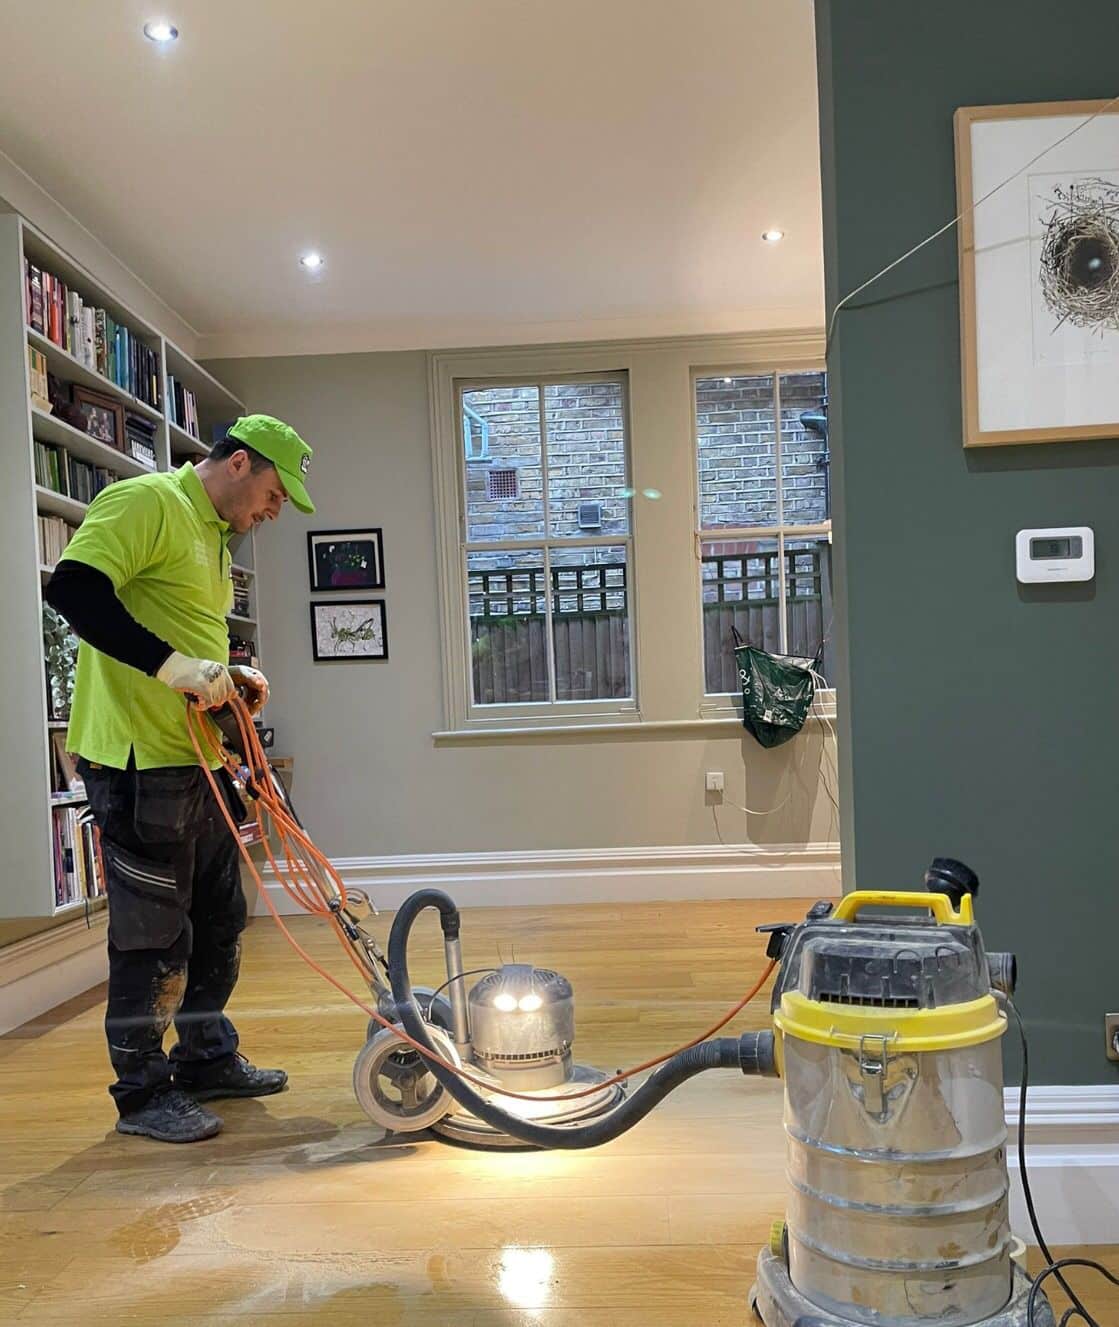 Worker operating a floor buffer attached to a dust extractor in a residential room.